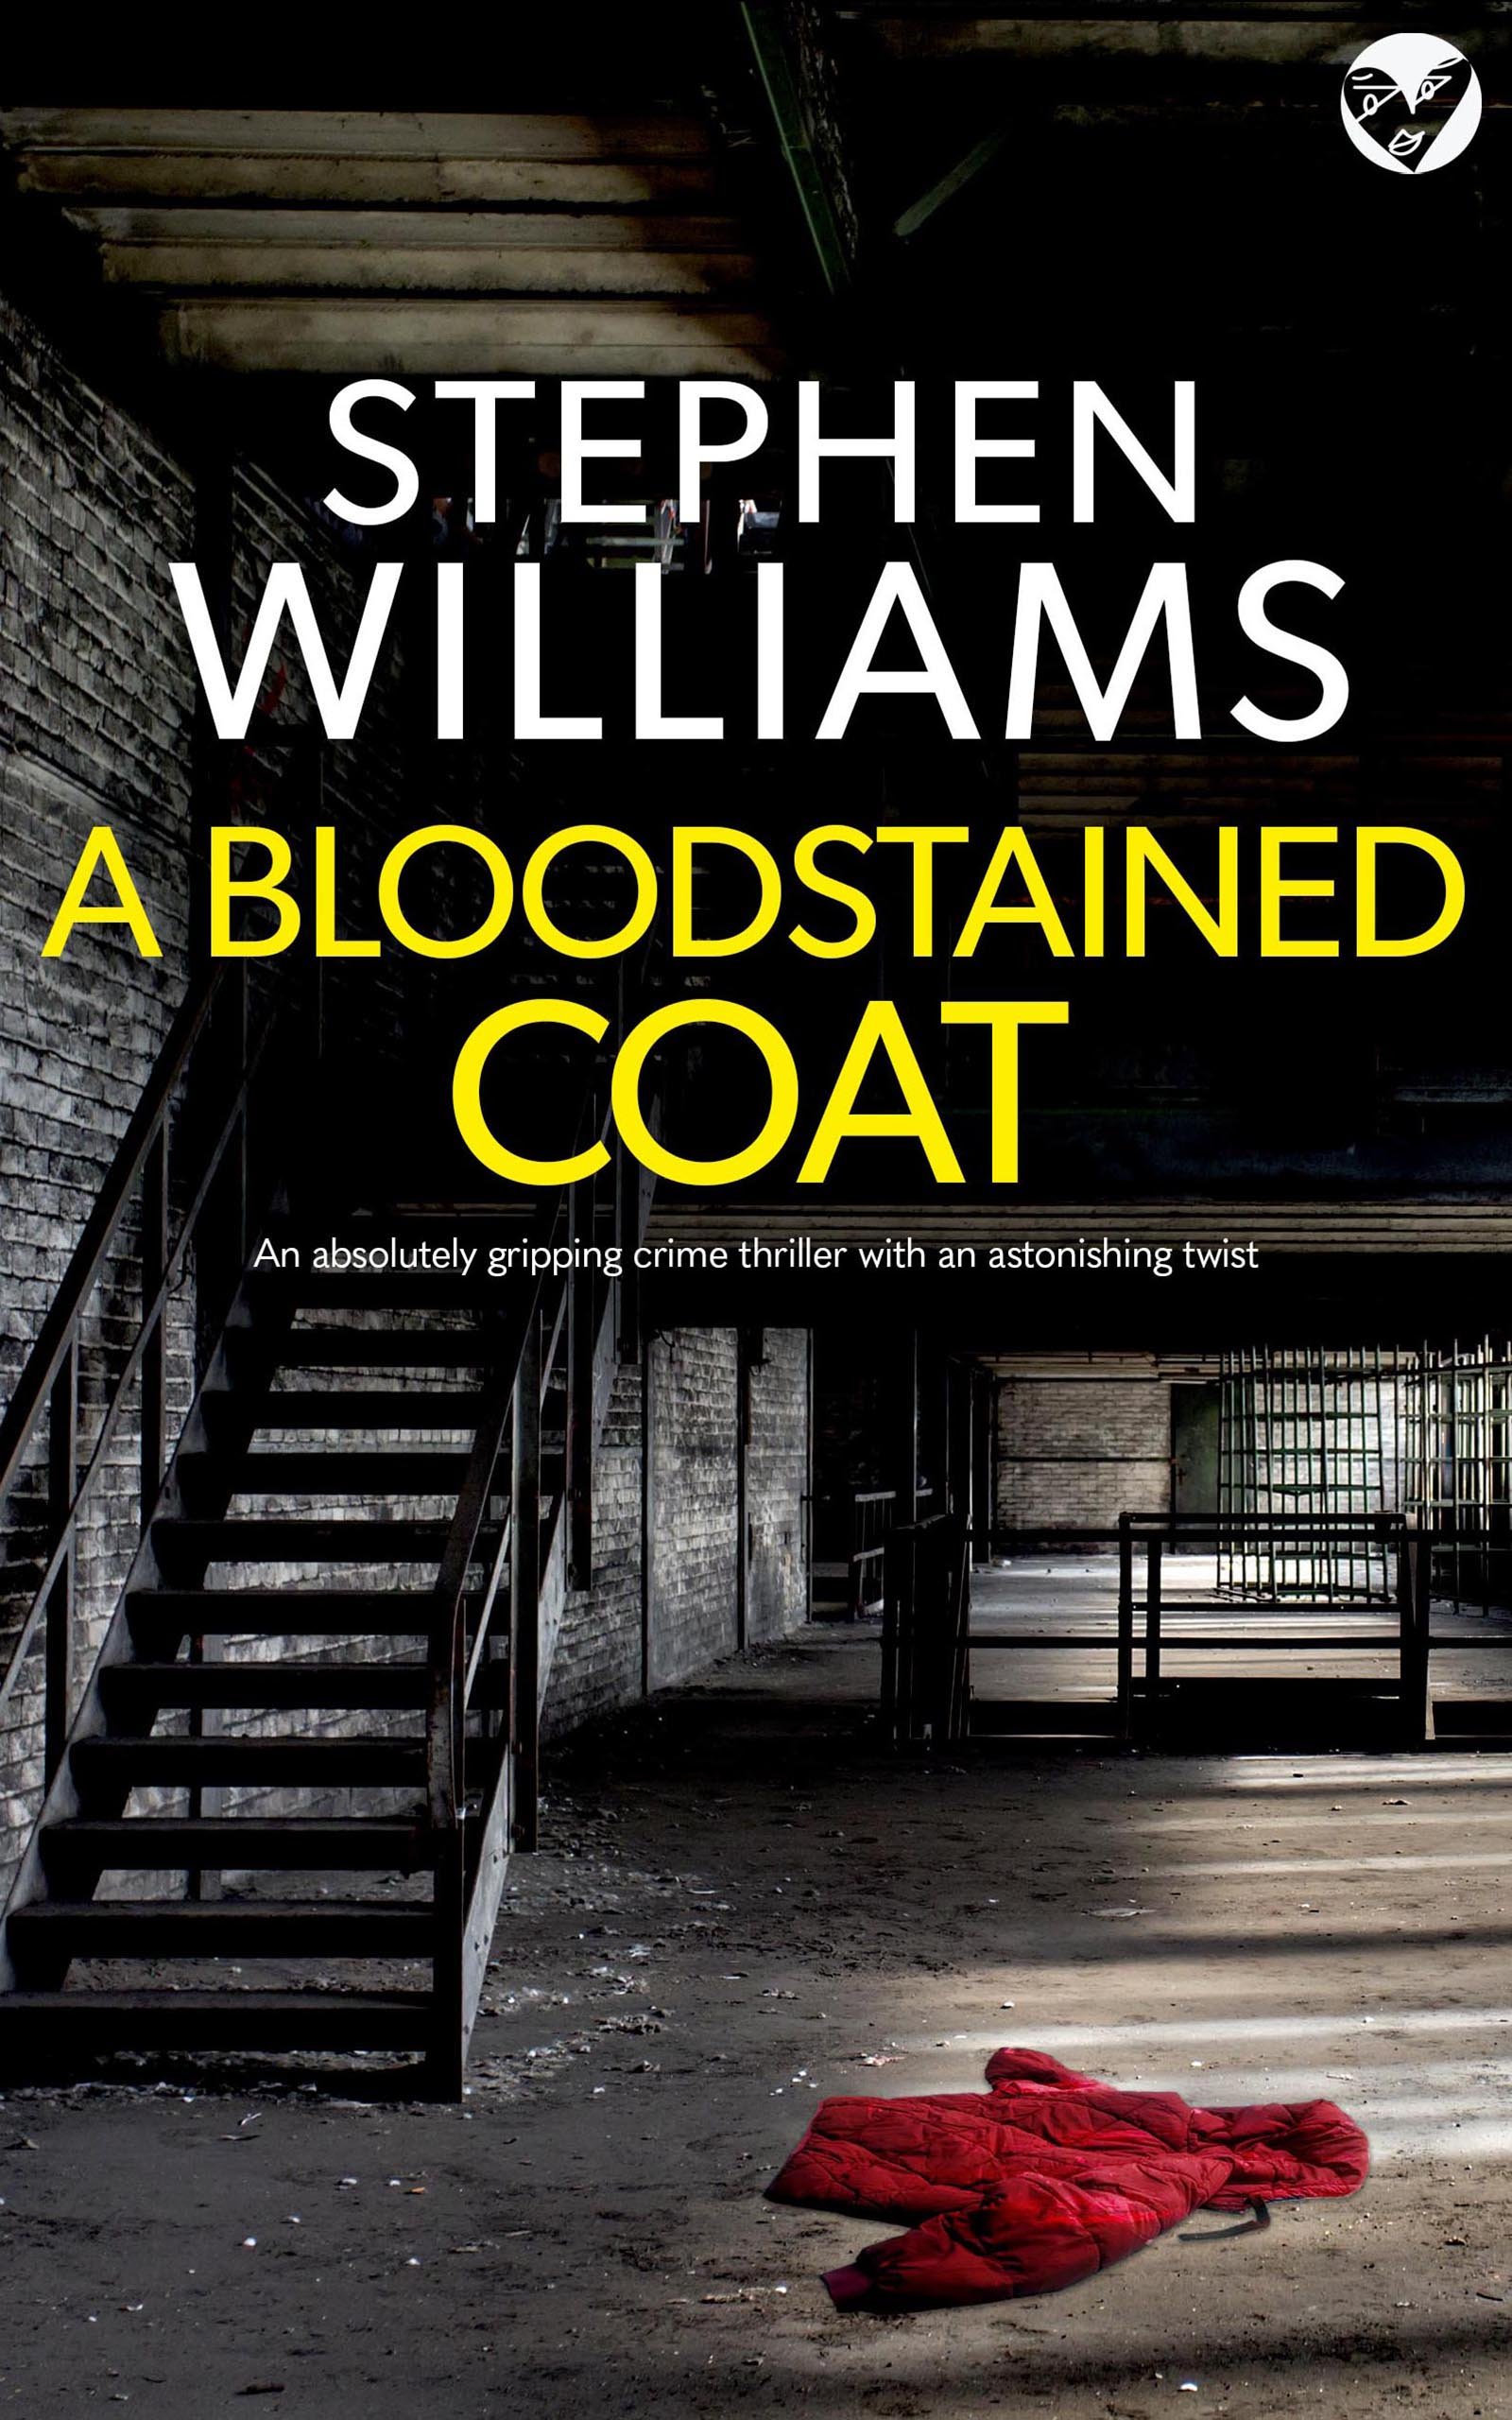 THE BLOODSTAINED COAT cover publish.jpg